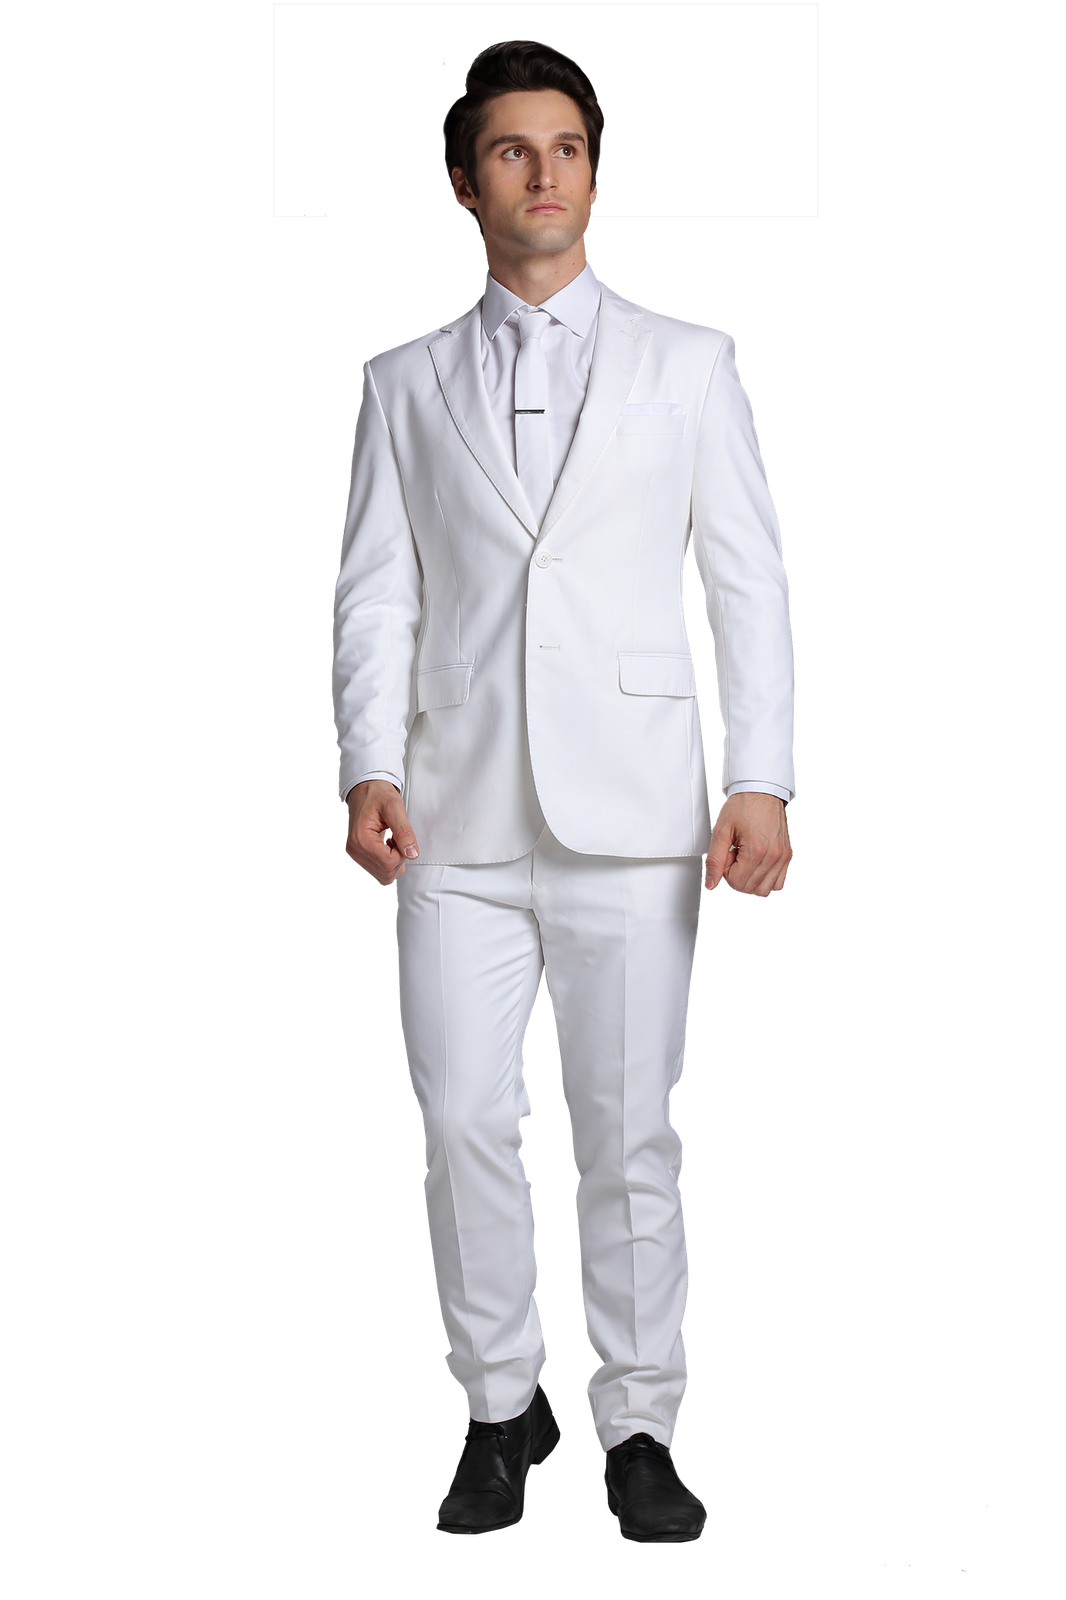 Great Wedding Suits